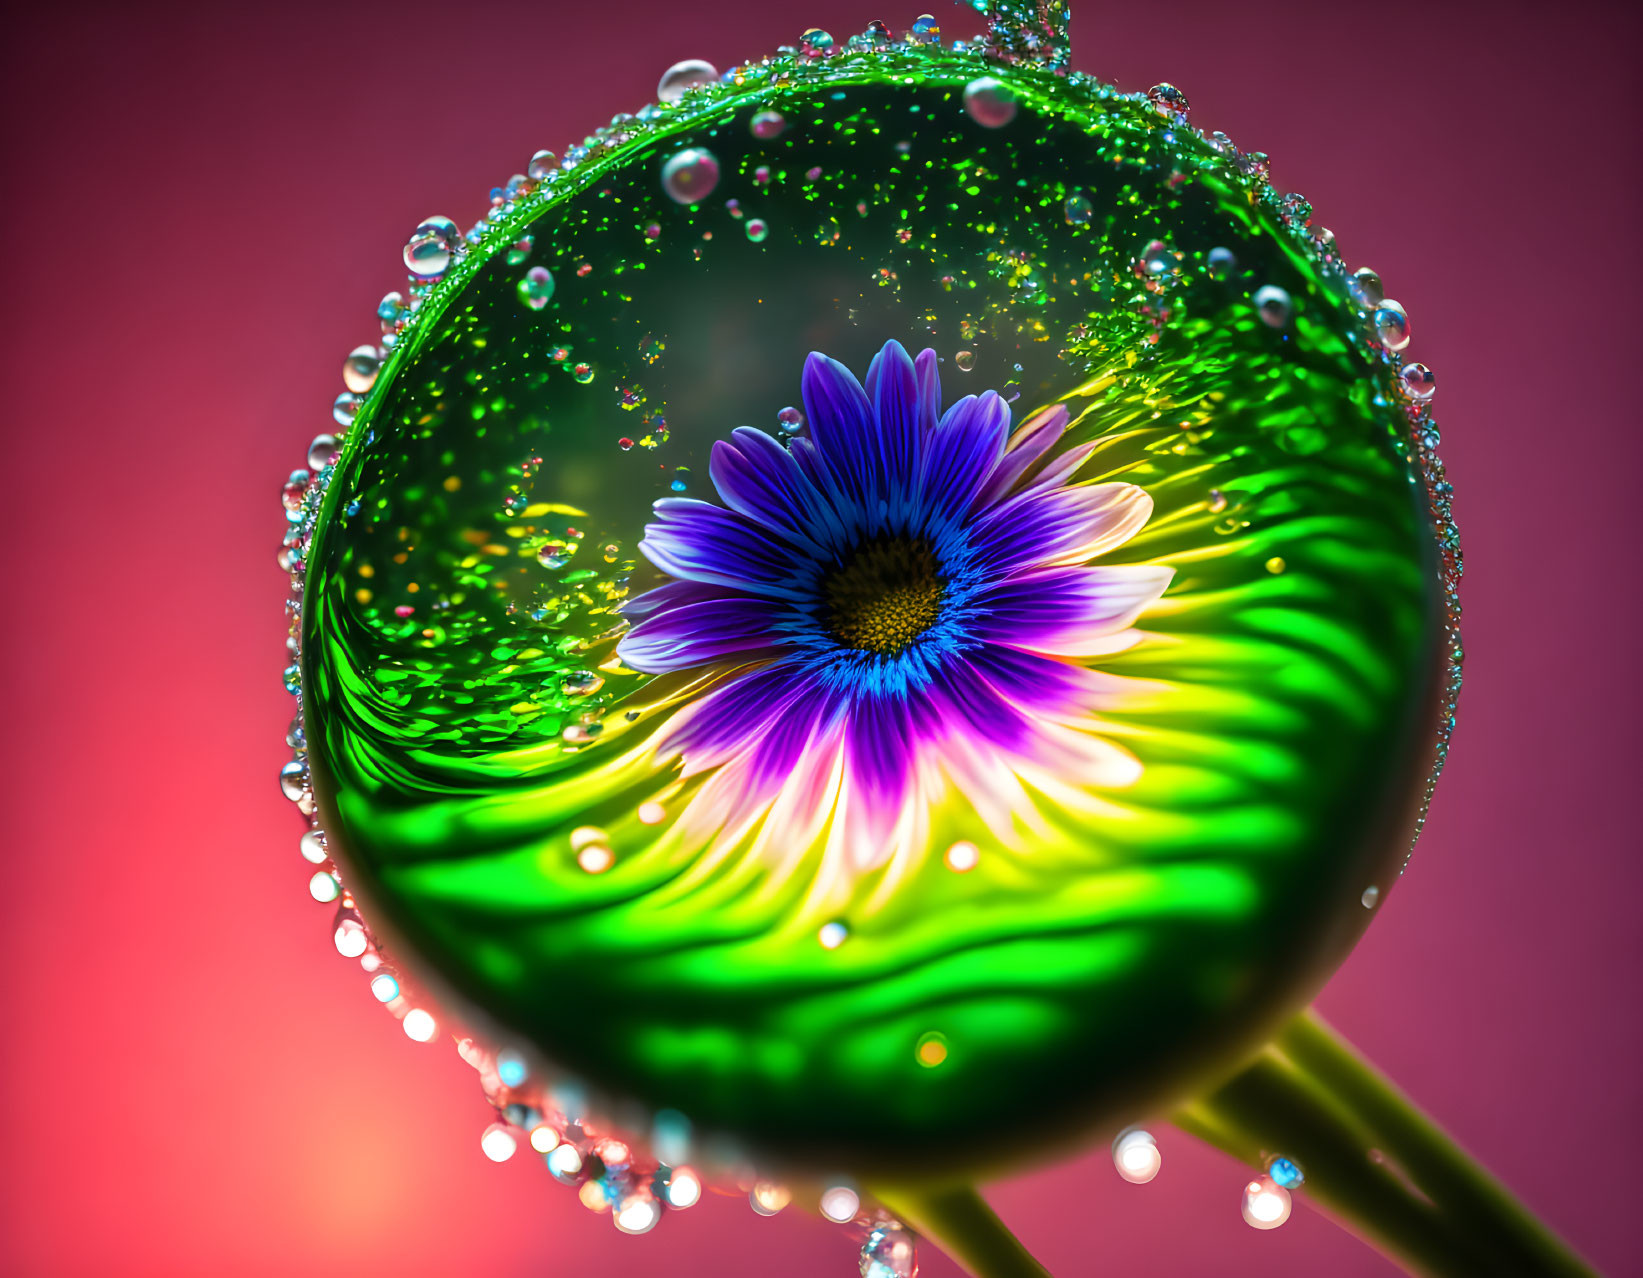 Colorful flower reflected in water droplet on pink surface